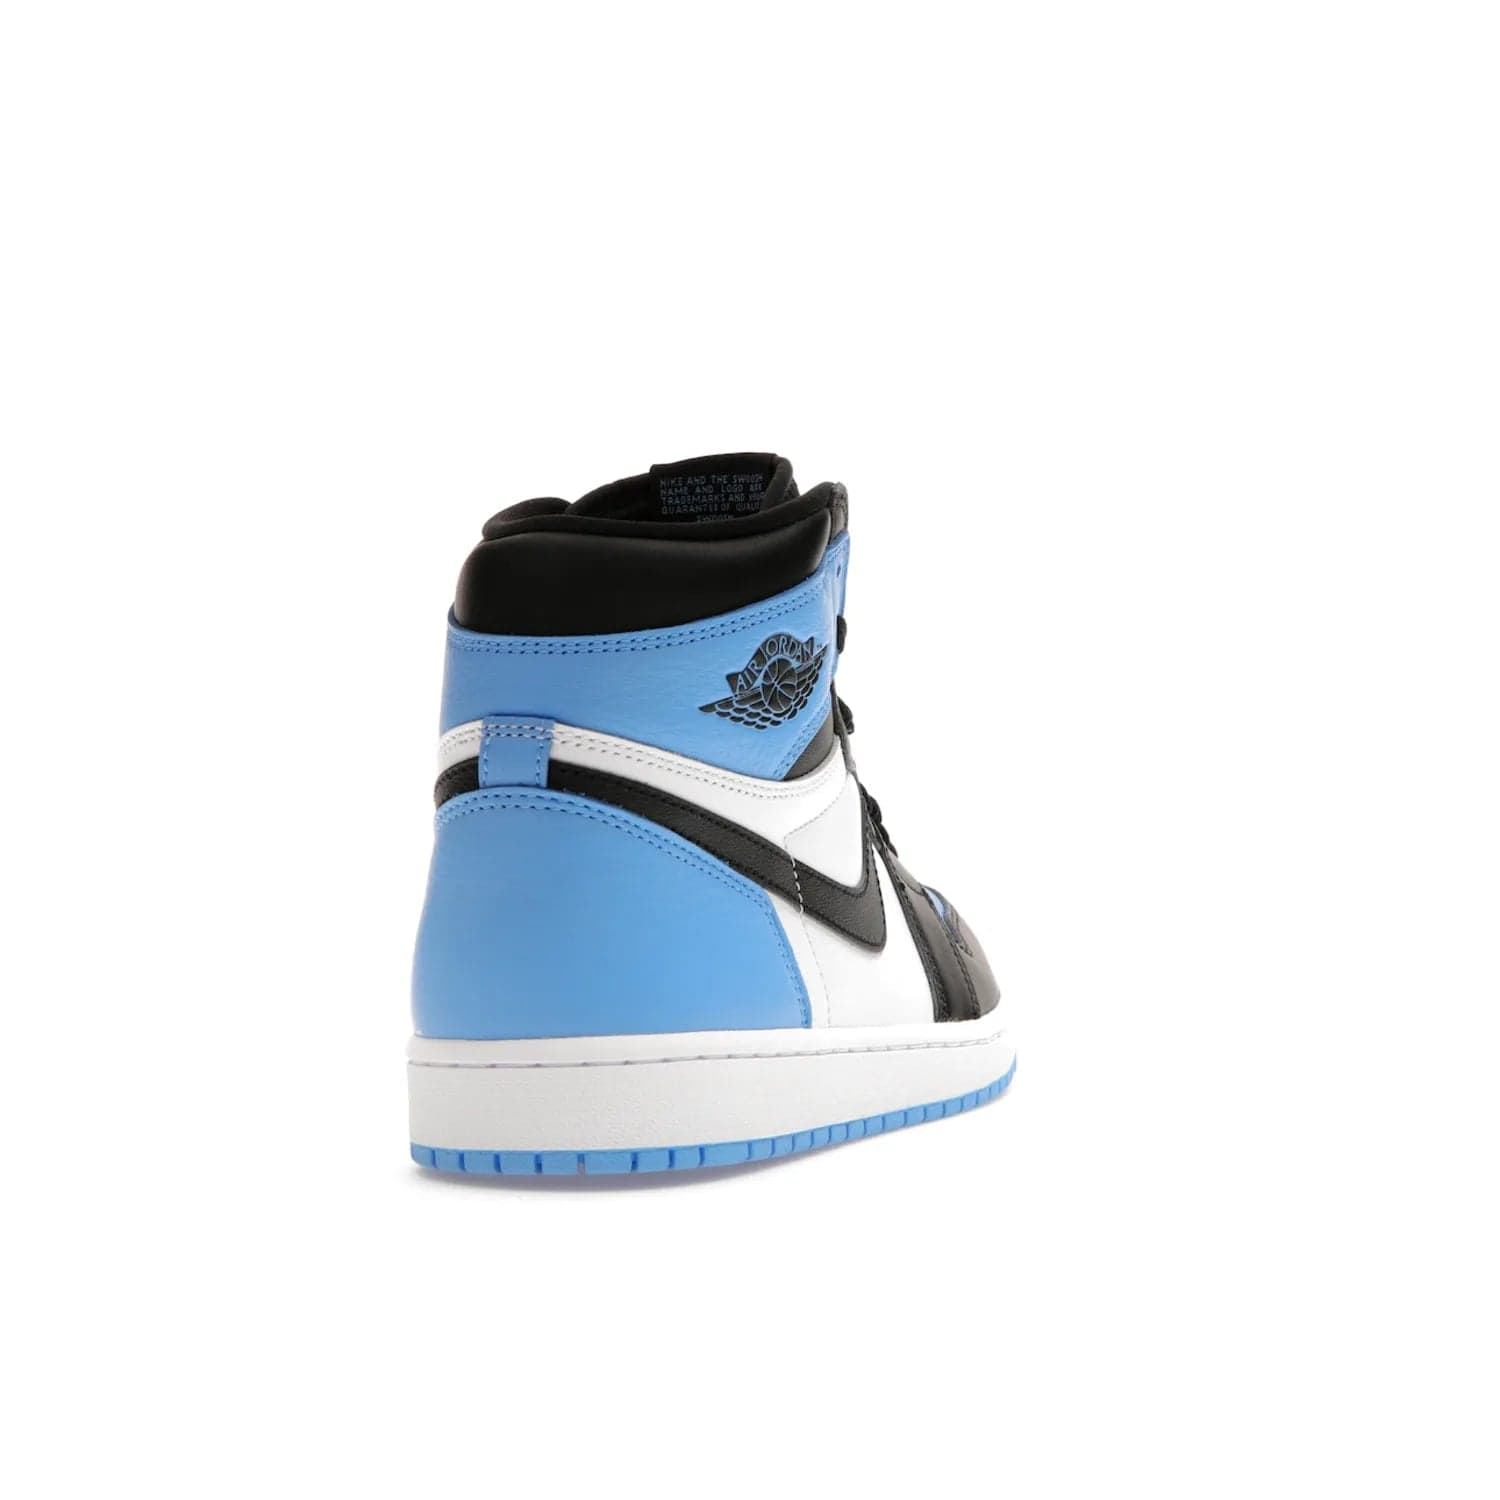 Jordan 1 Retro High OG UNC Toe - Image 30 - Only at www.BallersClubKickz.com - Jordan 1 High OG UNC Toe is a fashionable, high-quality sneaker featuring University Blue, Black White and White. Releasing July 22, 2023, it's the perfect pick up for sneakerheads.